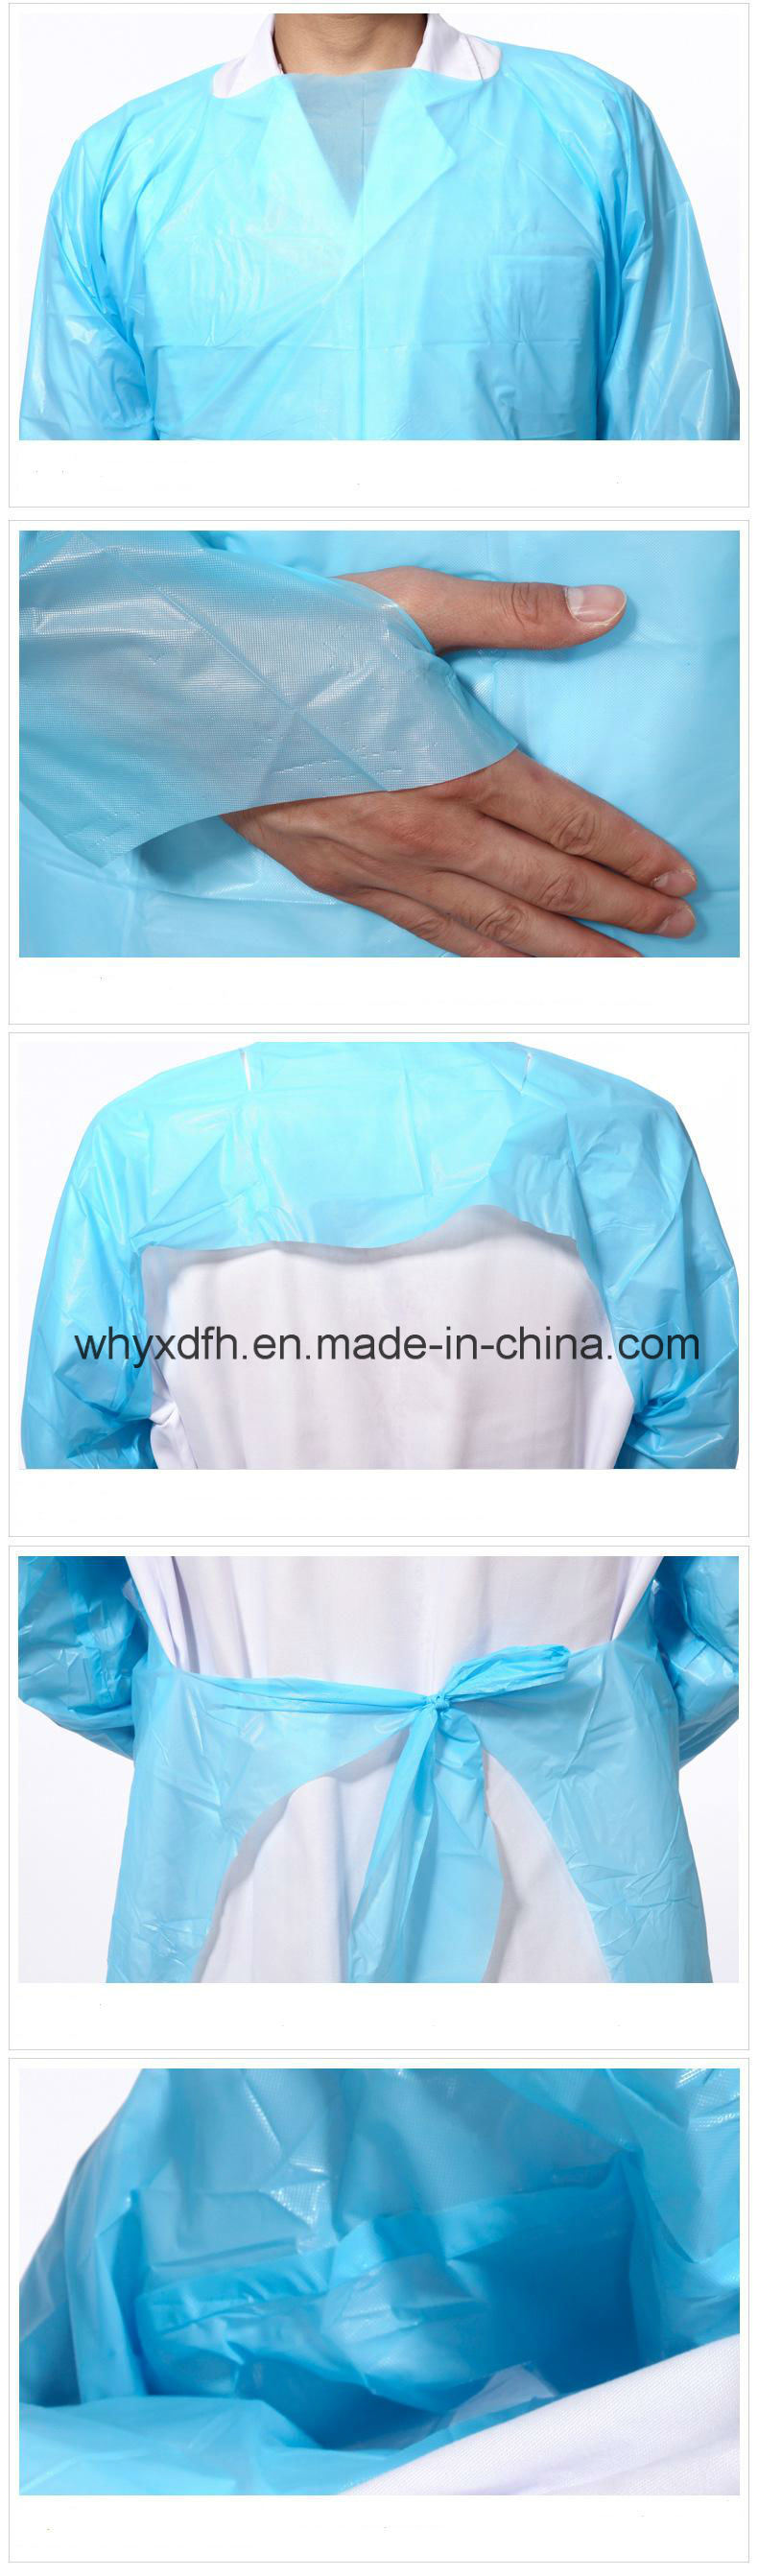 Hospital Impervious yellow/blue/SMS/PP/NONWOVEN Protective Medical, surgical Gown, Visitor/Exam/Patient Gown, CPE isolation Gown, Disposable PE apron, CPE Gown